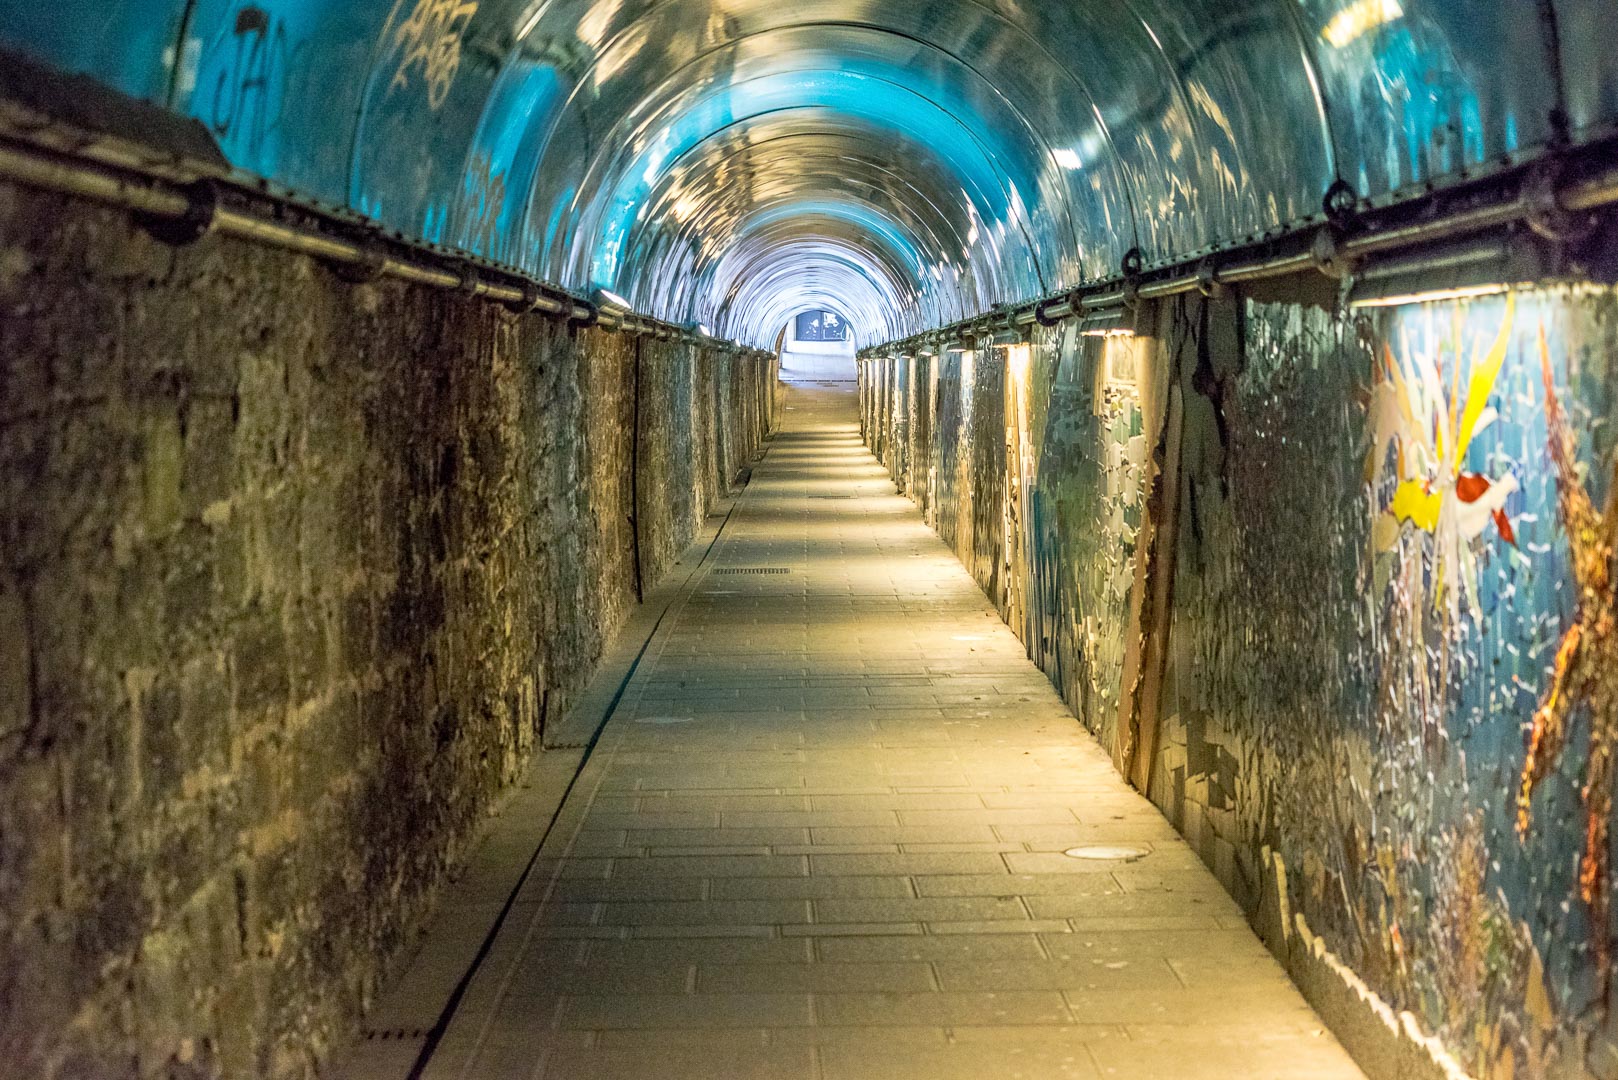 Backplate • ID: 5617 • HDRI Haven - Tunnel With Concrete Path 